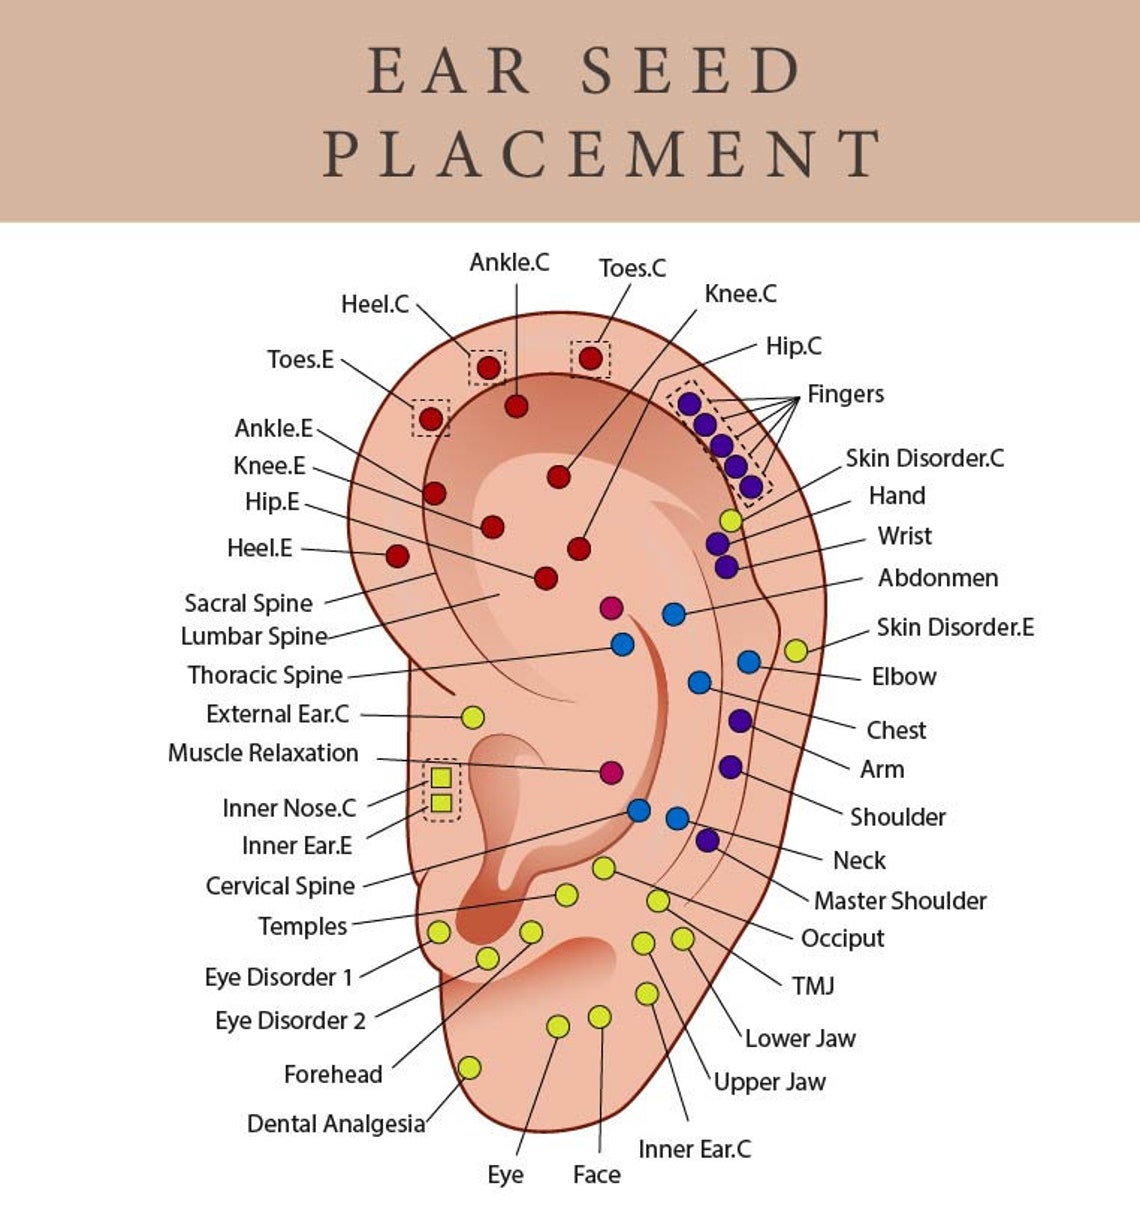 Printable Ear Seed Placement Chart Comprehensive Acupuncture Ear Chart ...